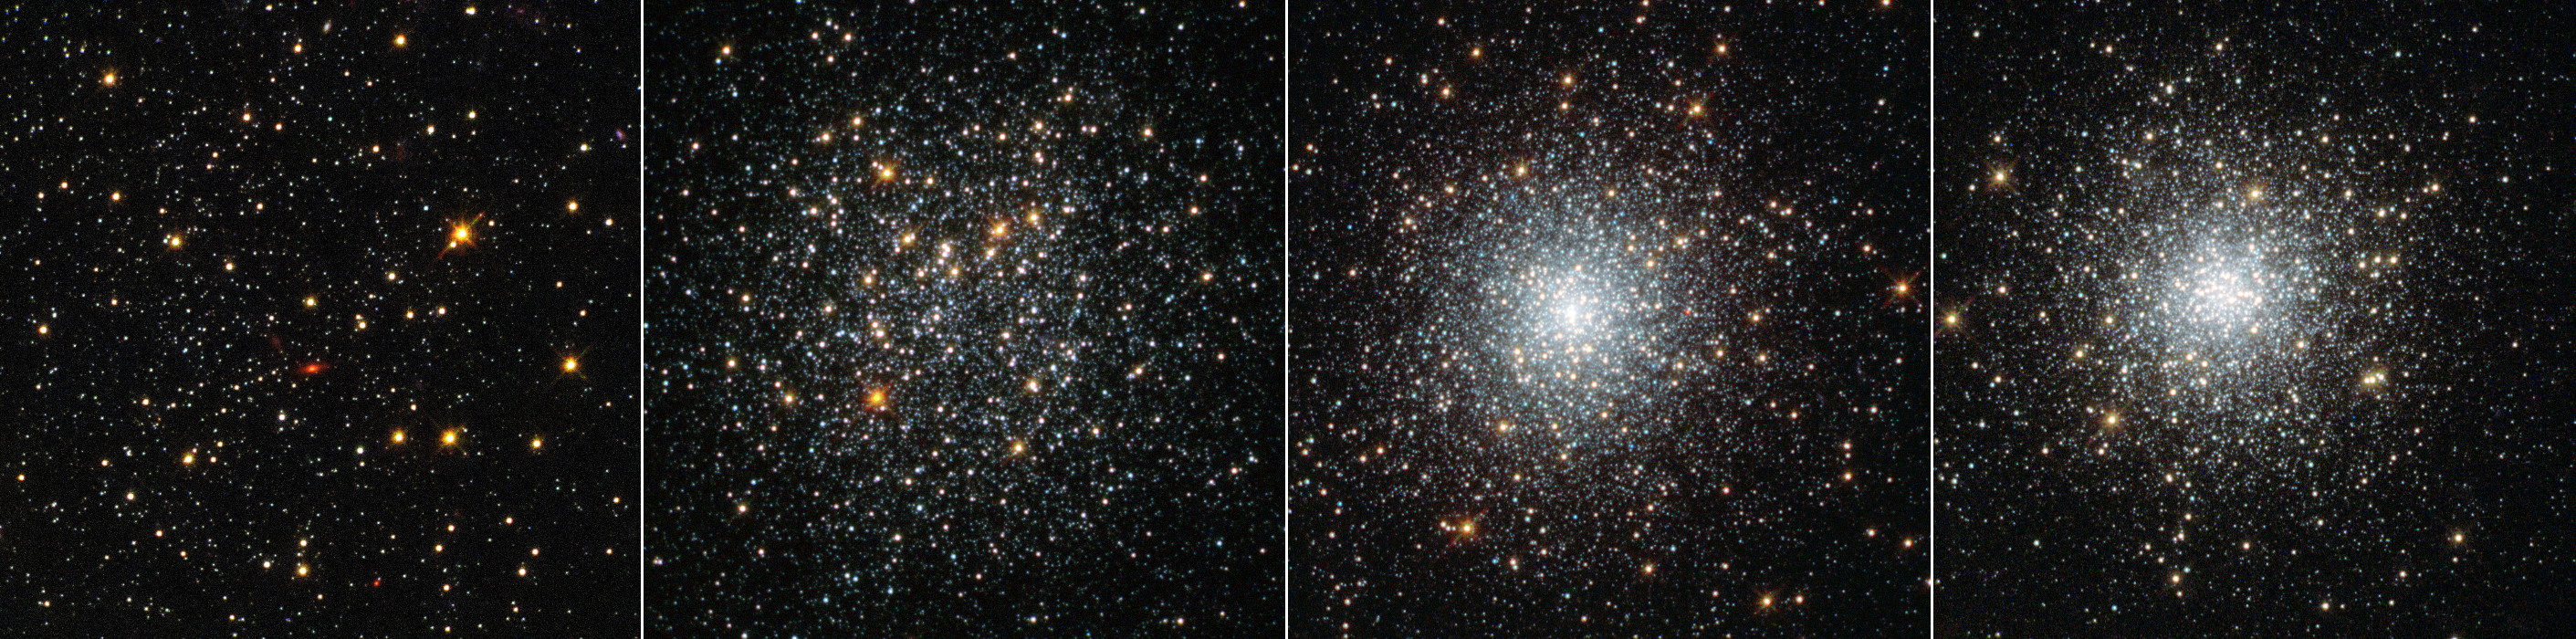 This NASA/ESA Hubble Space Telescope image shows four globular clusters in the dwarf galaxy Fornax.